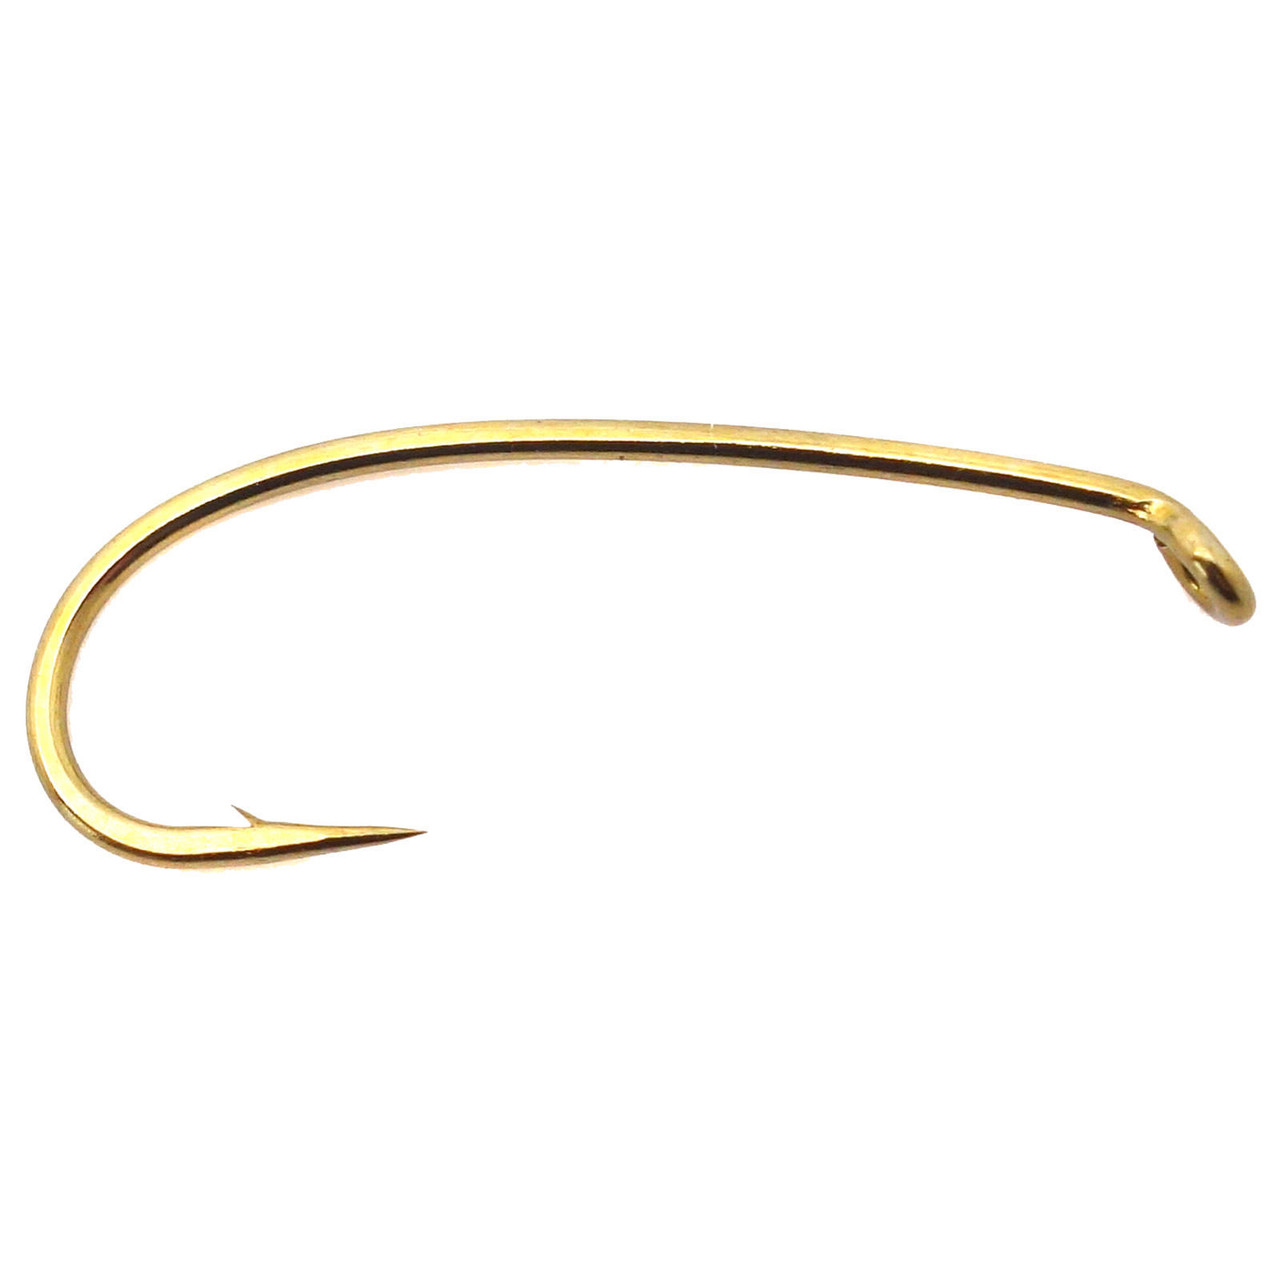 Daiichi 1760 Curved Nymph Hook - Size 12